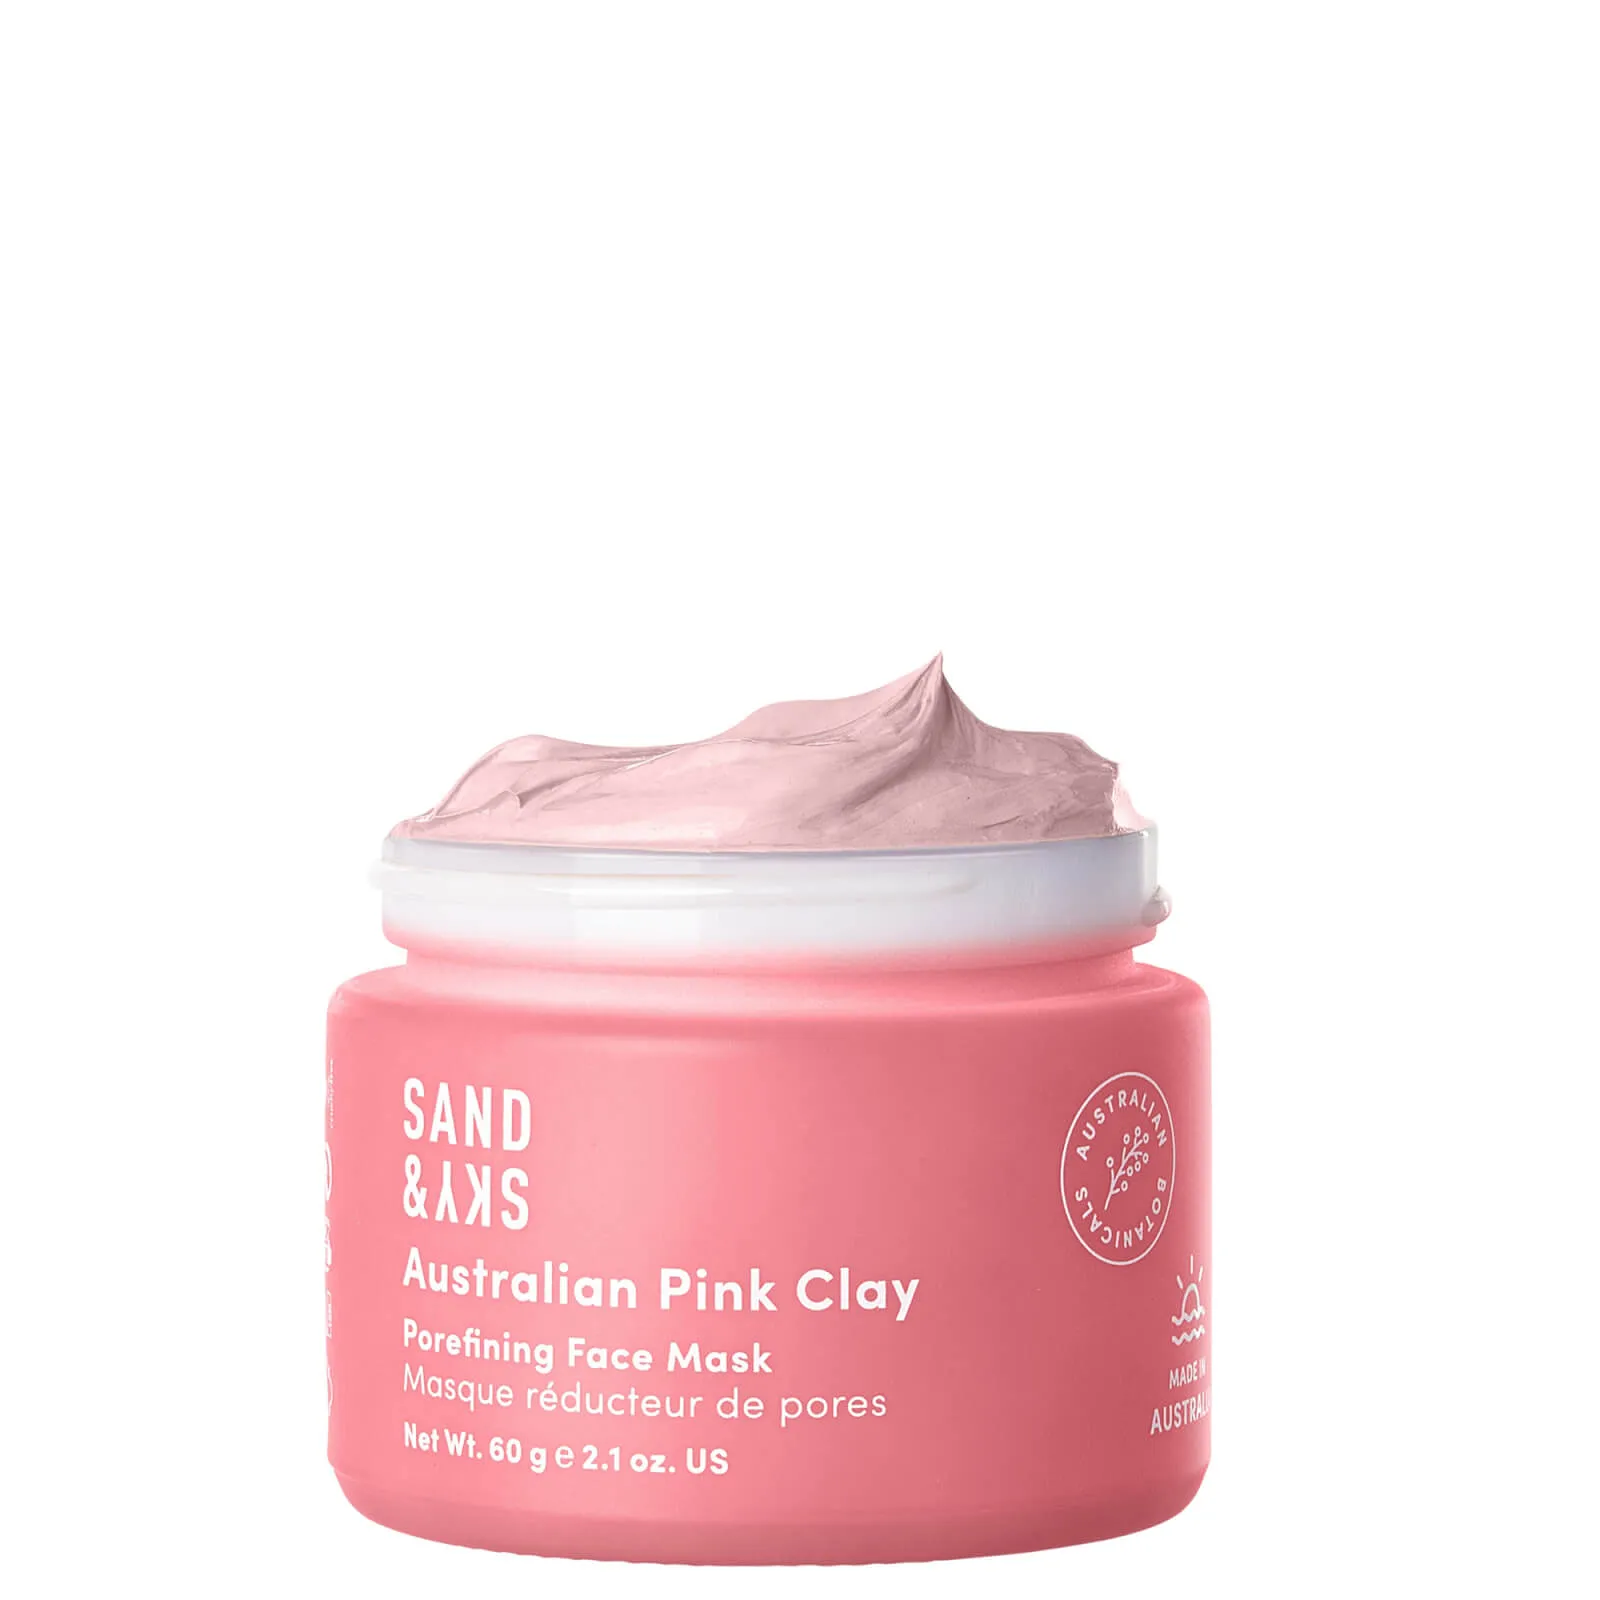  Brilliant Skin Purifying Pink Clay Mask 60g